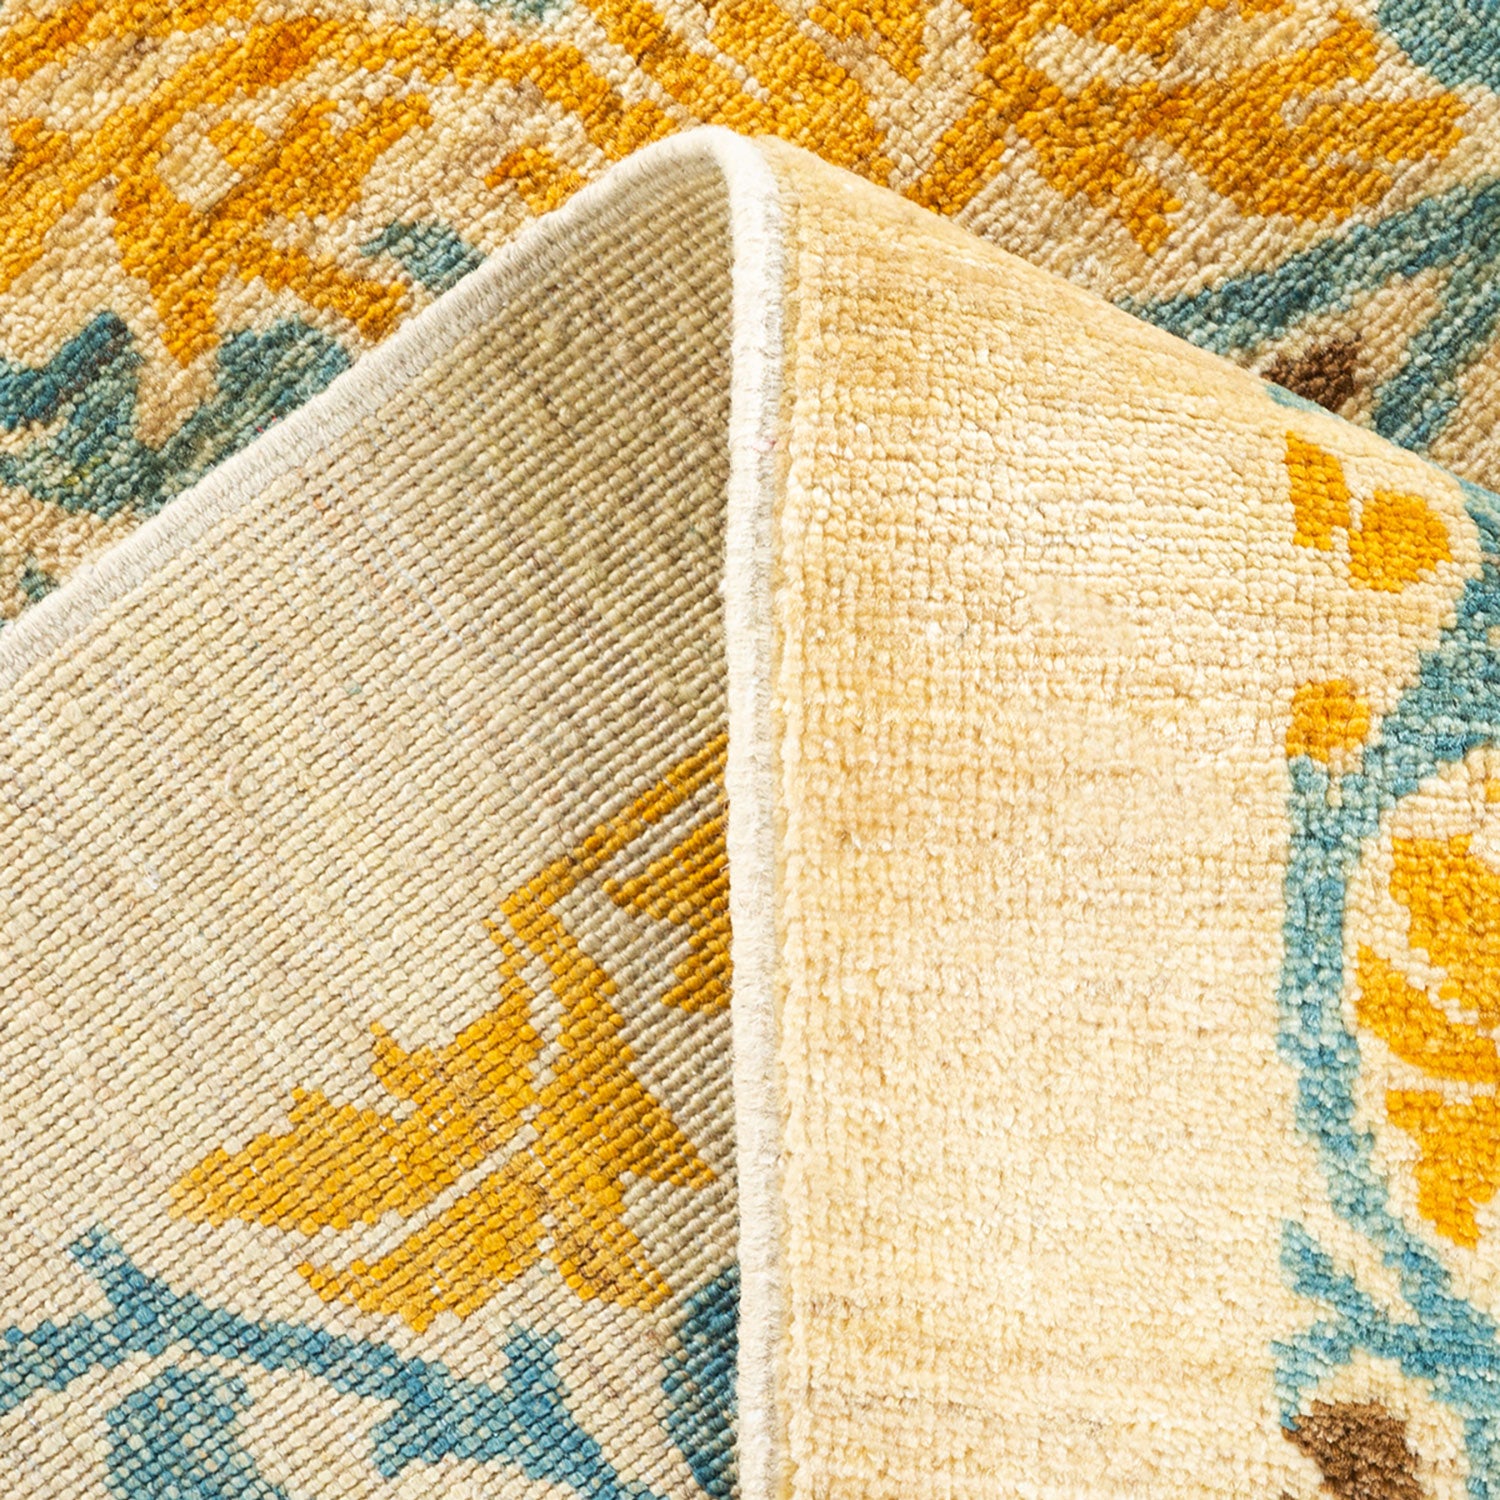 Vibrant and cozy folded carpet with intricate floral design revealed.